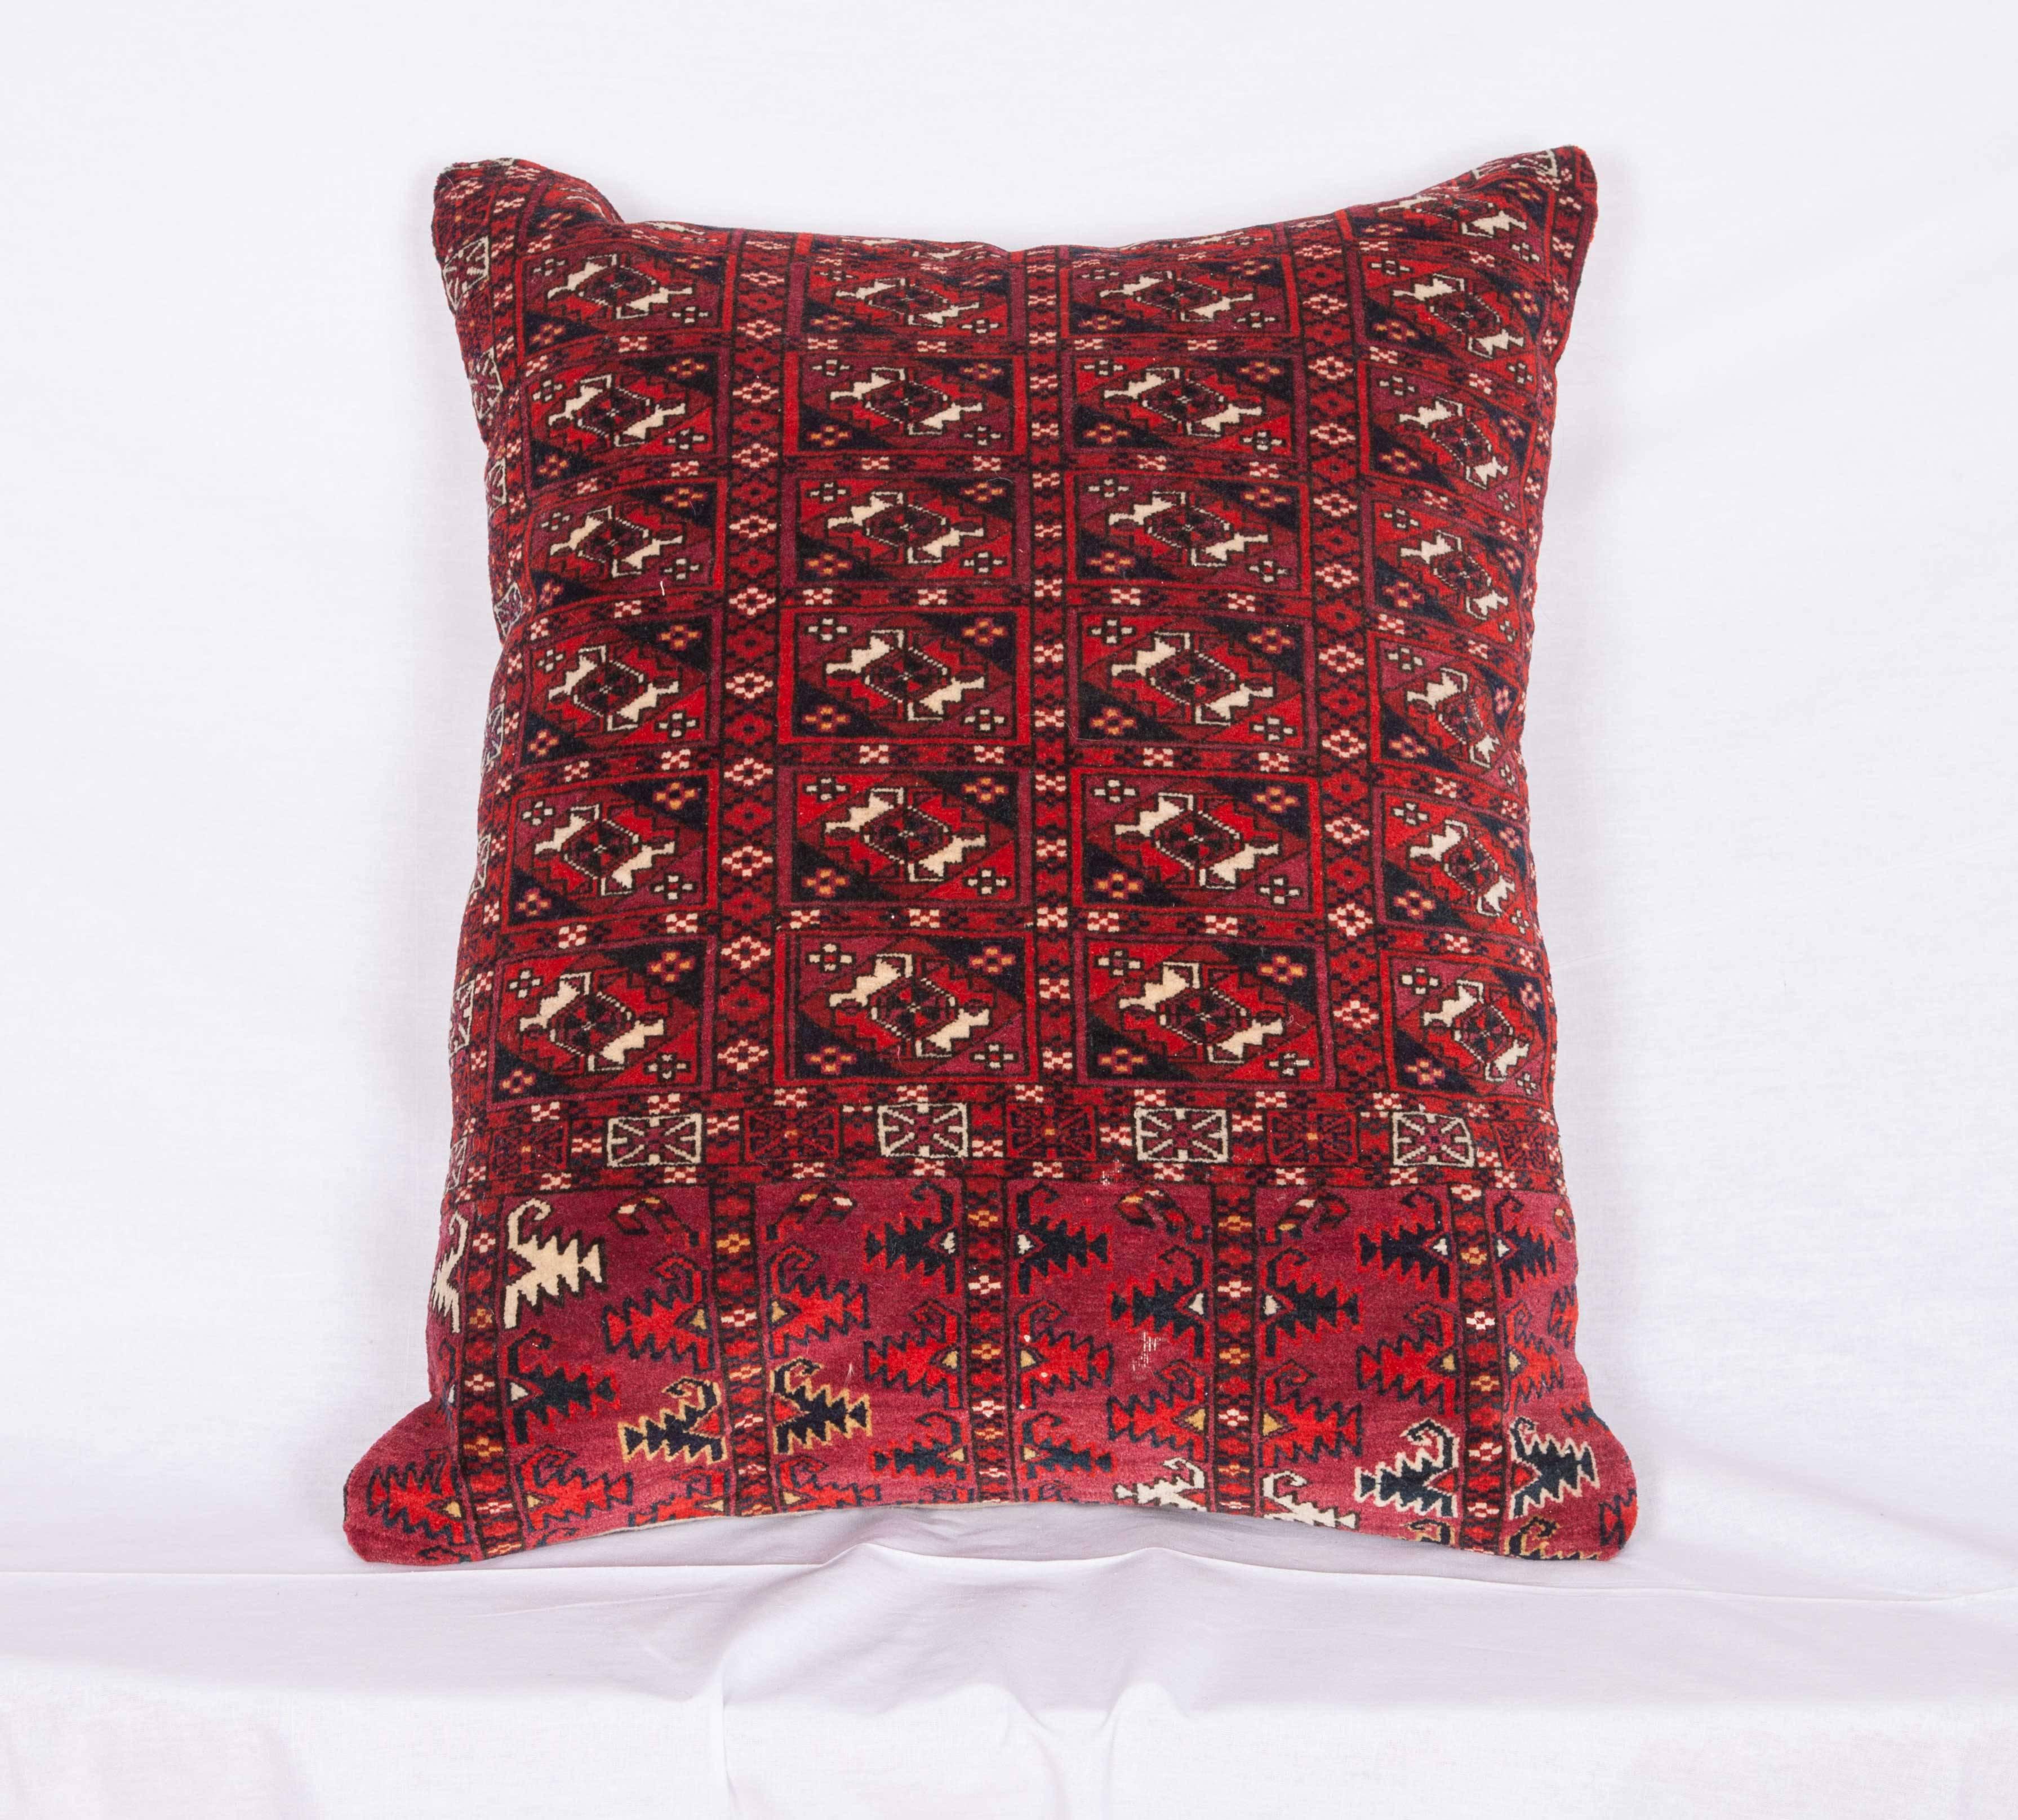 Hand-Woven Antique Pillow Made Out of an Early 20th Century Turkmen Tekke Chuval